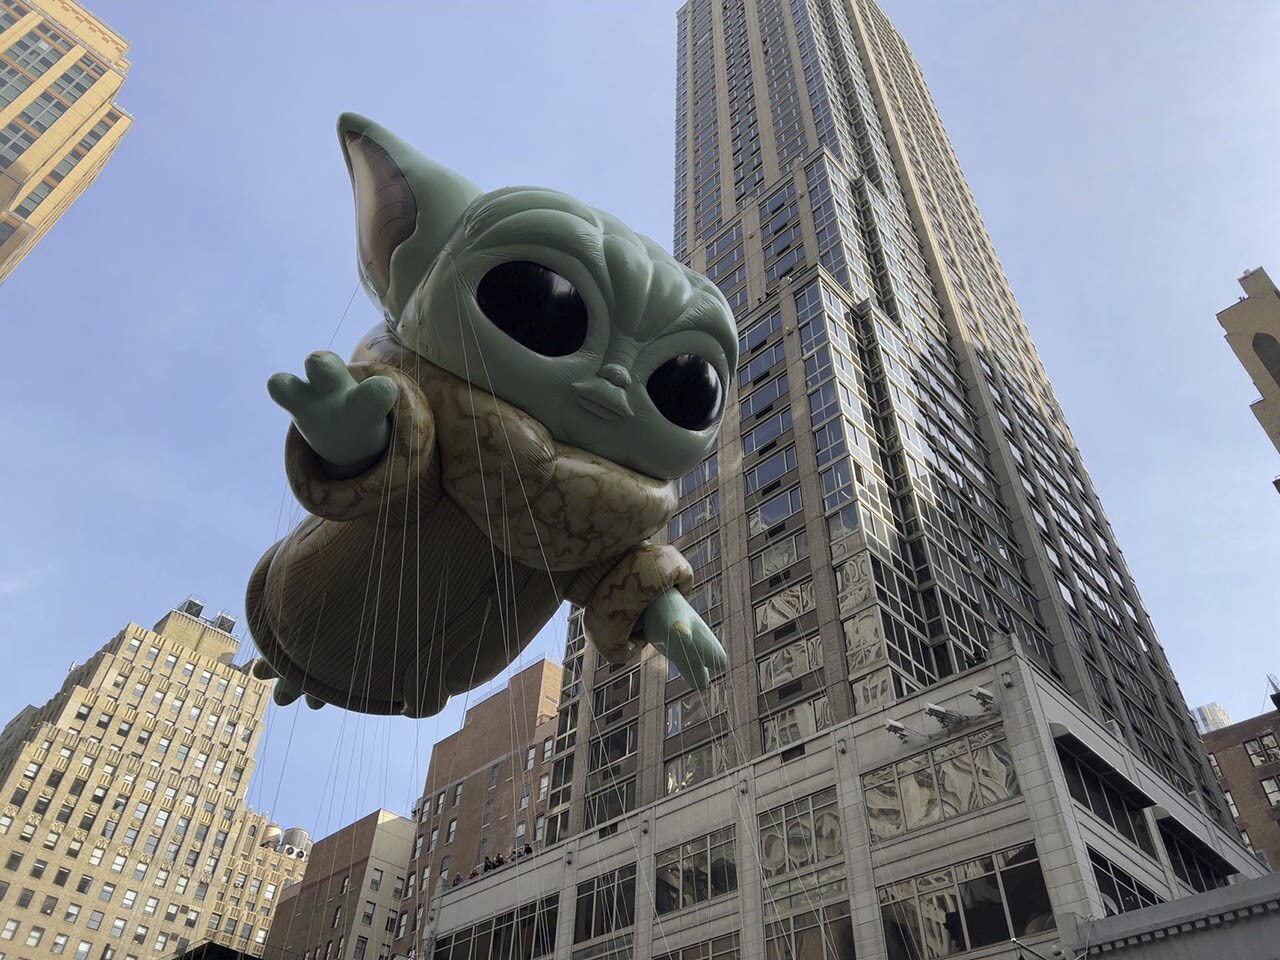 Grogu in Memorable Macy’s Thanksgiving Day Parade Appearance 